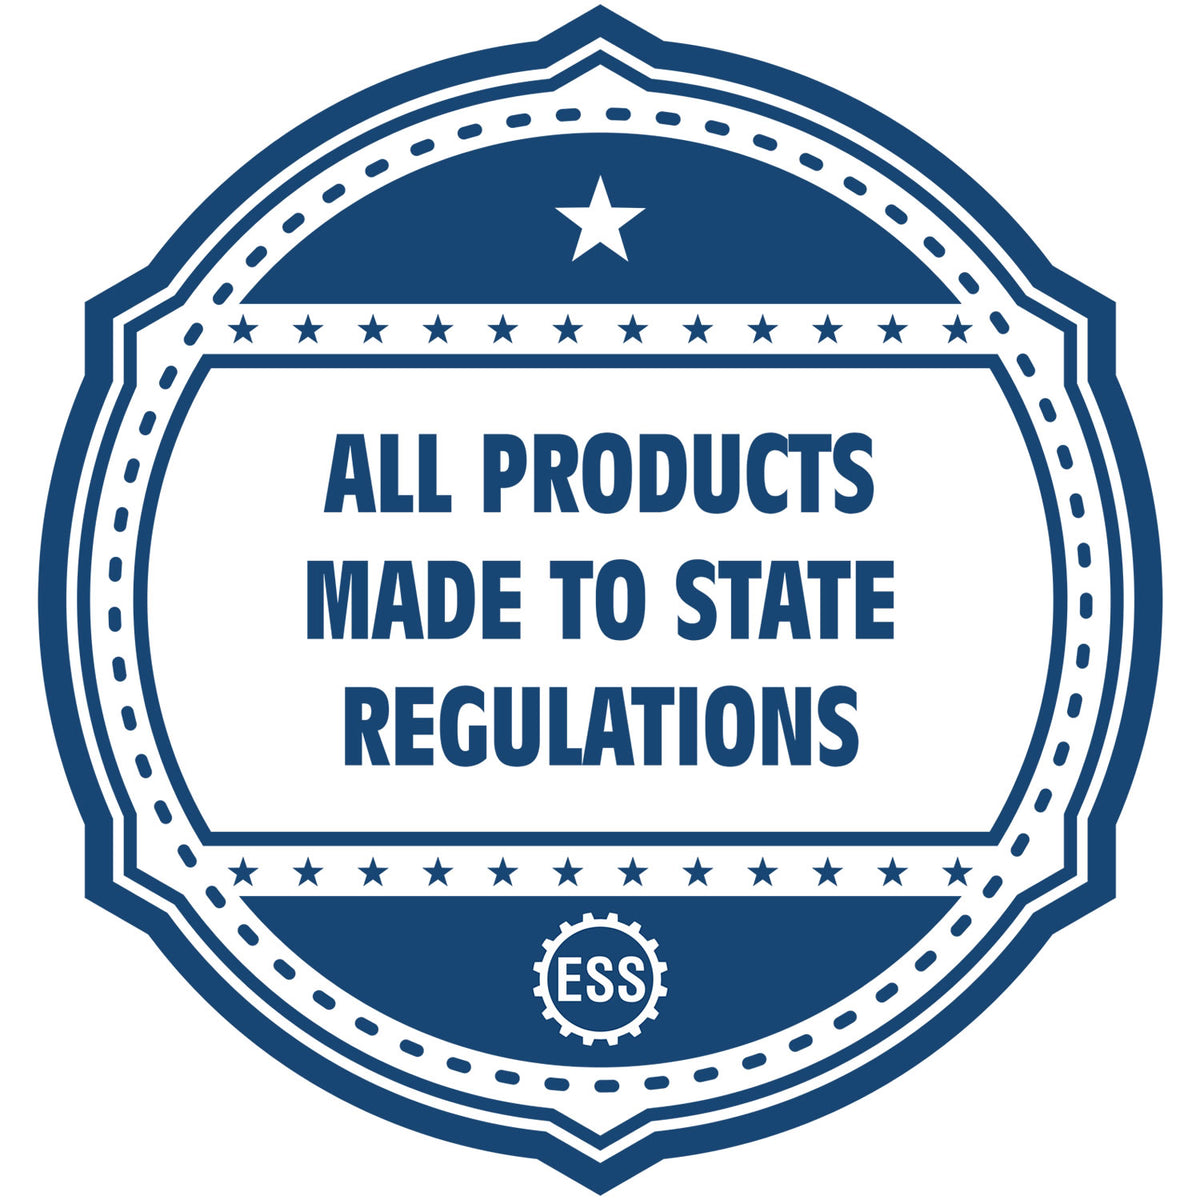 A blue icon or badge for the Heavy Duty Cast Iron Vermont Geologist Seal Embosser showing that this product is made in compliance with state regulations.